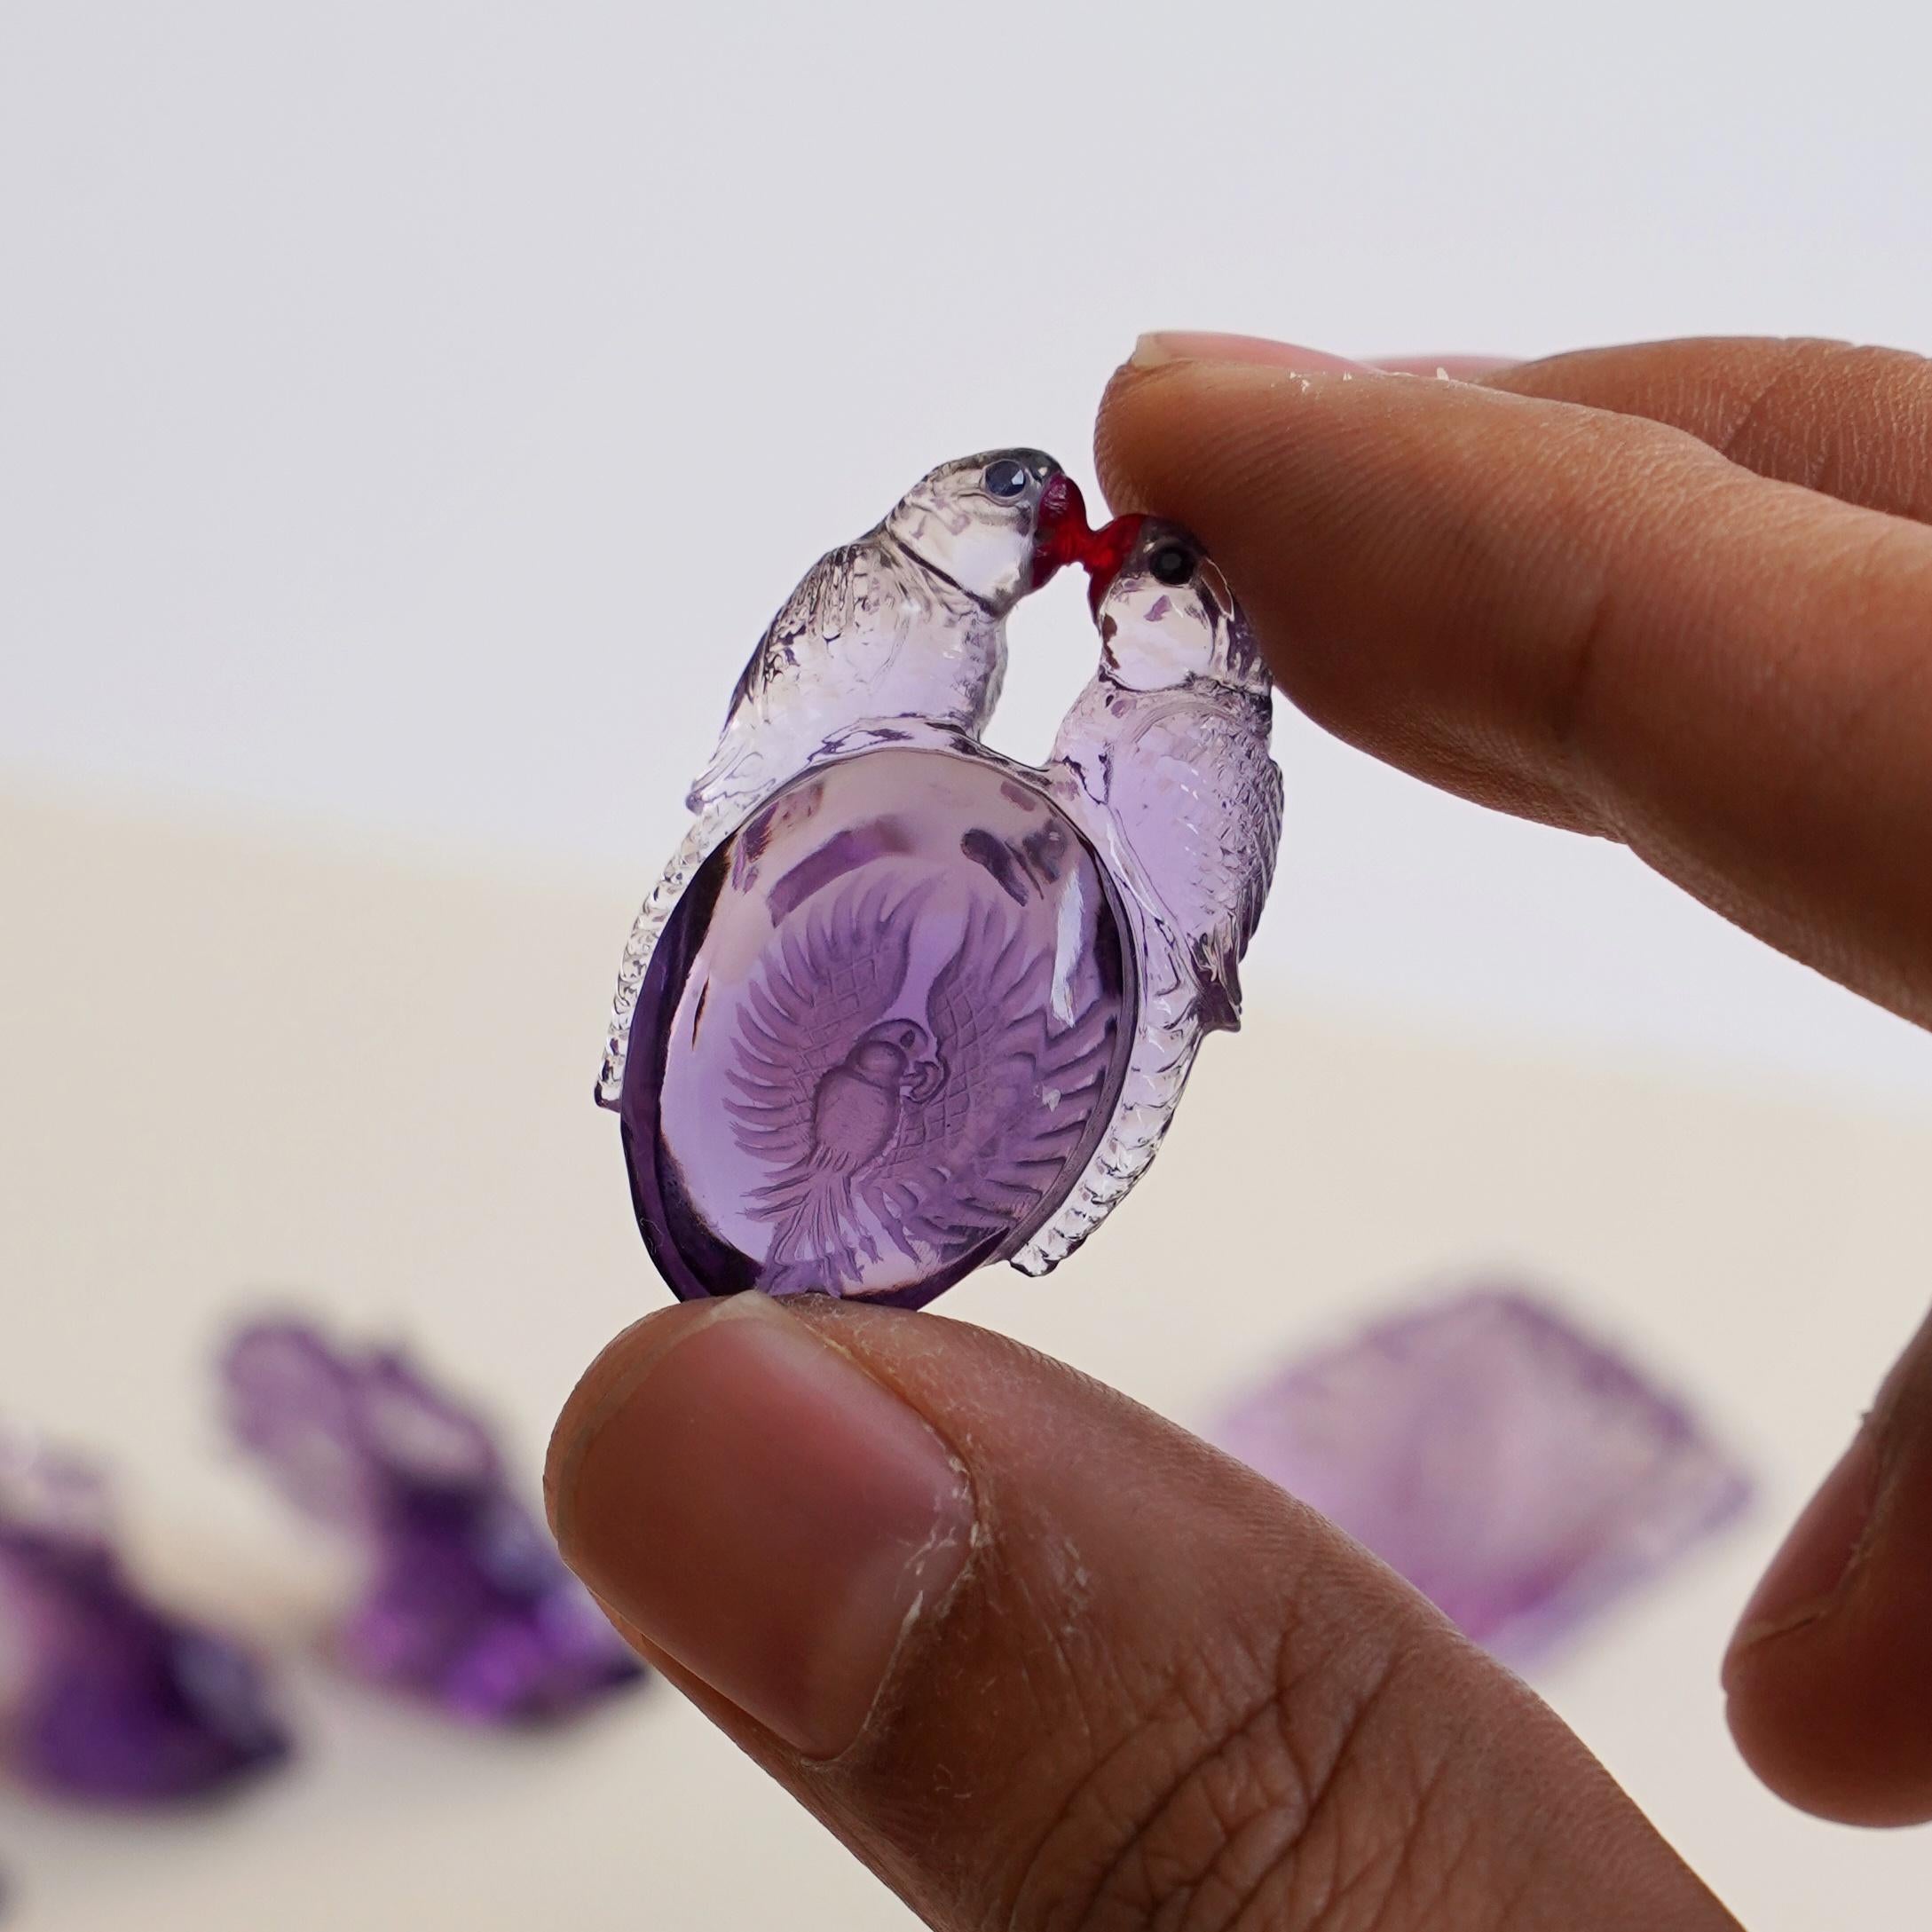 This love couple parrots pair carving on a natural Brazilian lavender amethyst is hand-carved by our expert lapidary artist in jaipur which transforms raw stones into unique art works. The baby parrot which is undercaved with reverse intaglio